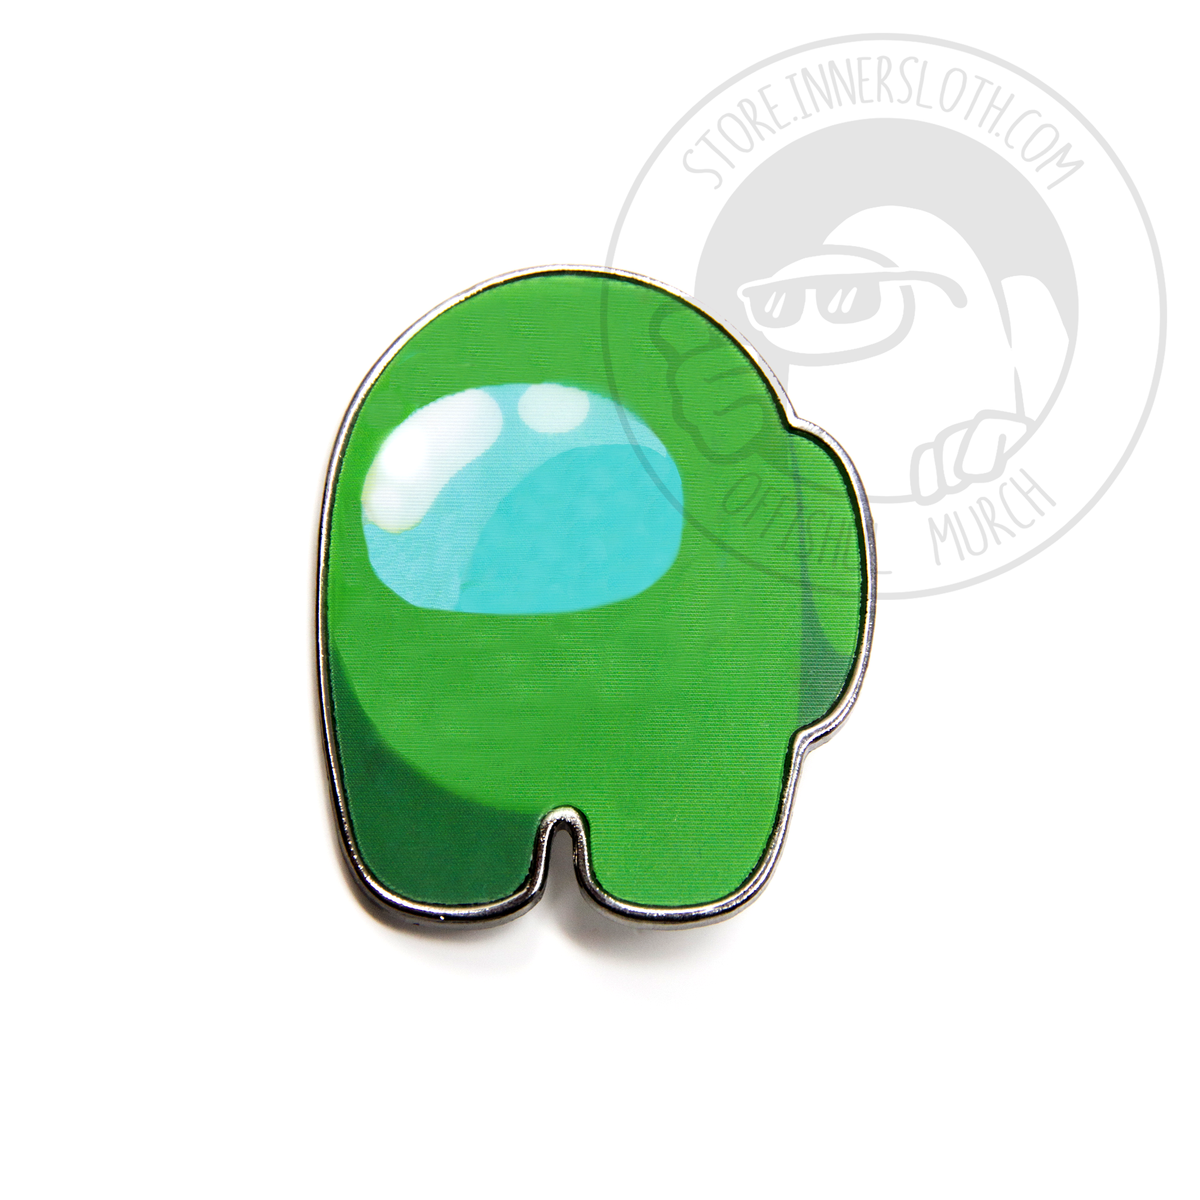 A still image of the Among Us: Lenticular Impostor Pin in Green.